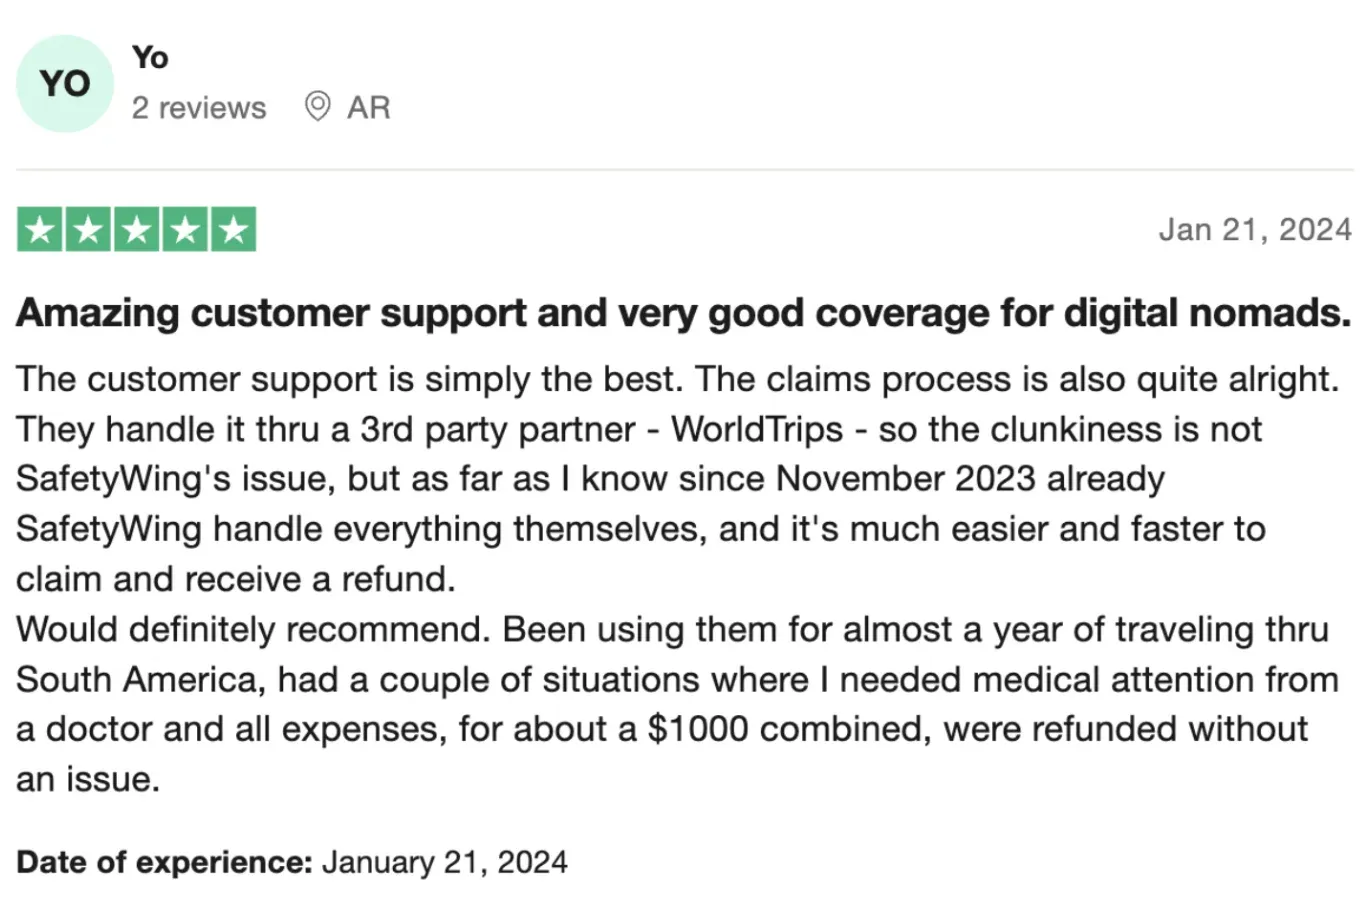 Another positive Trustpilot review of SafetyWing Insurance